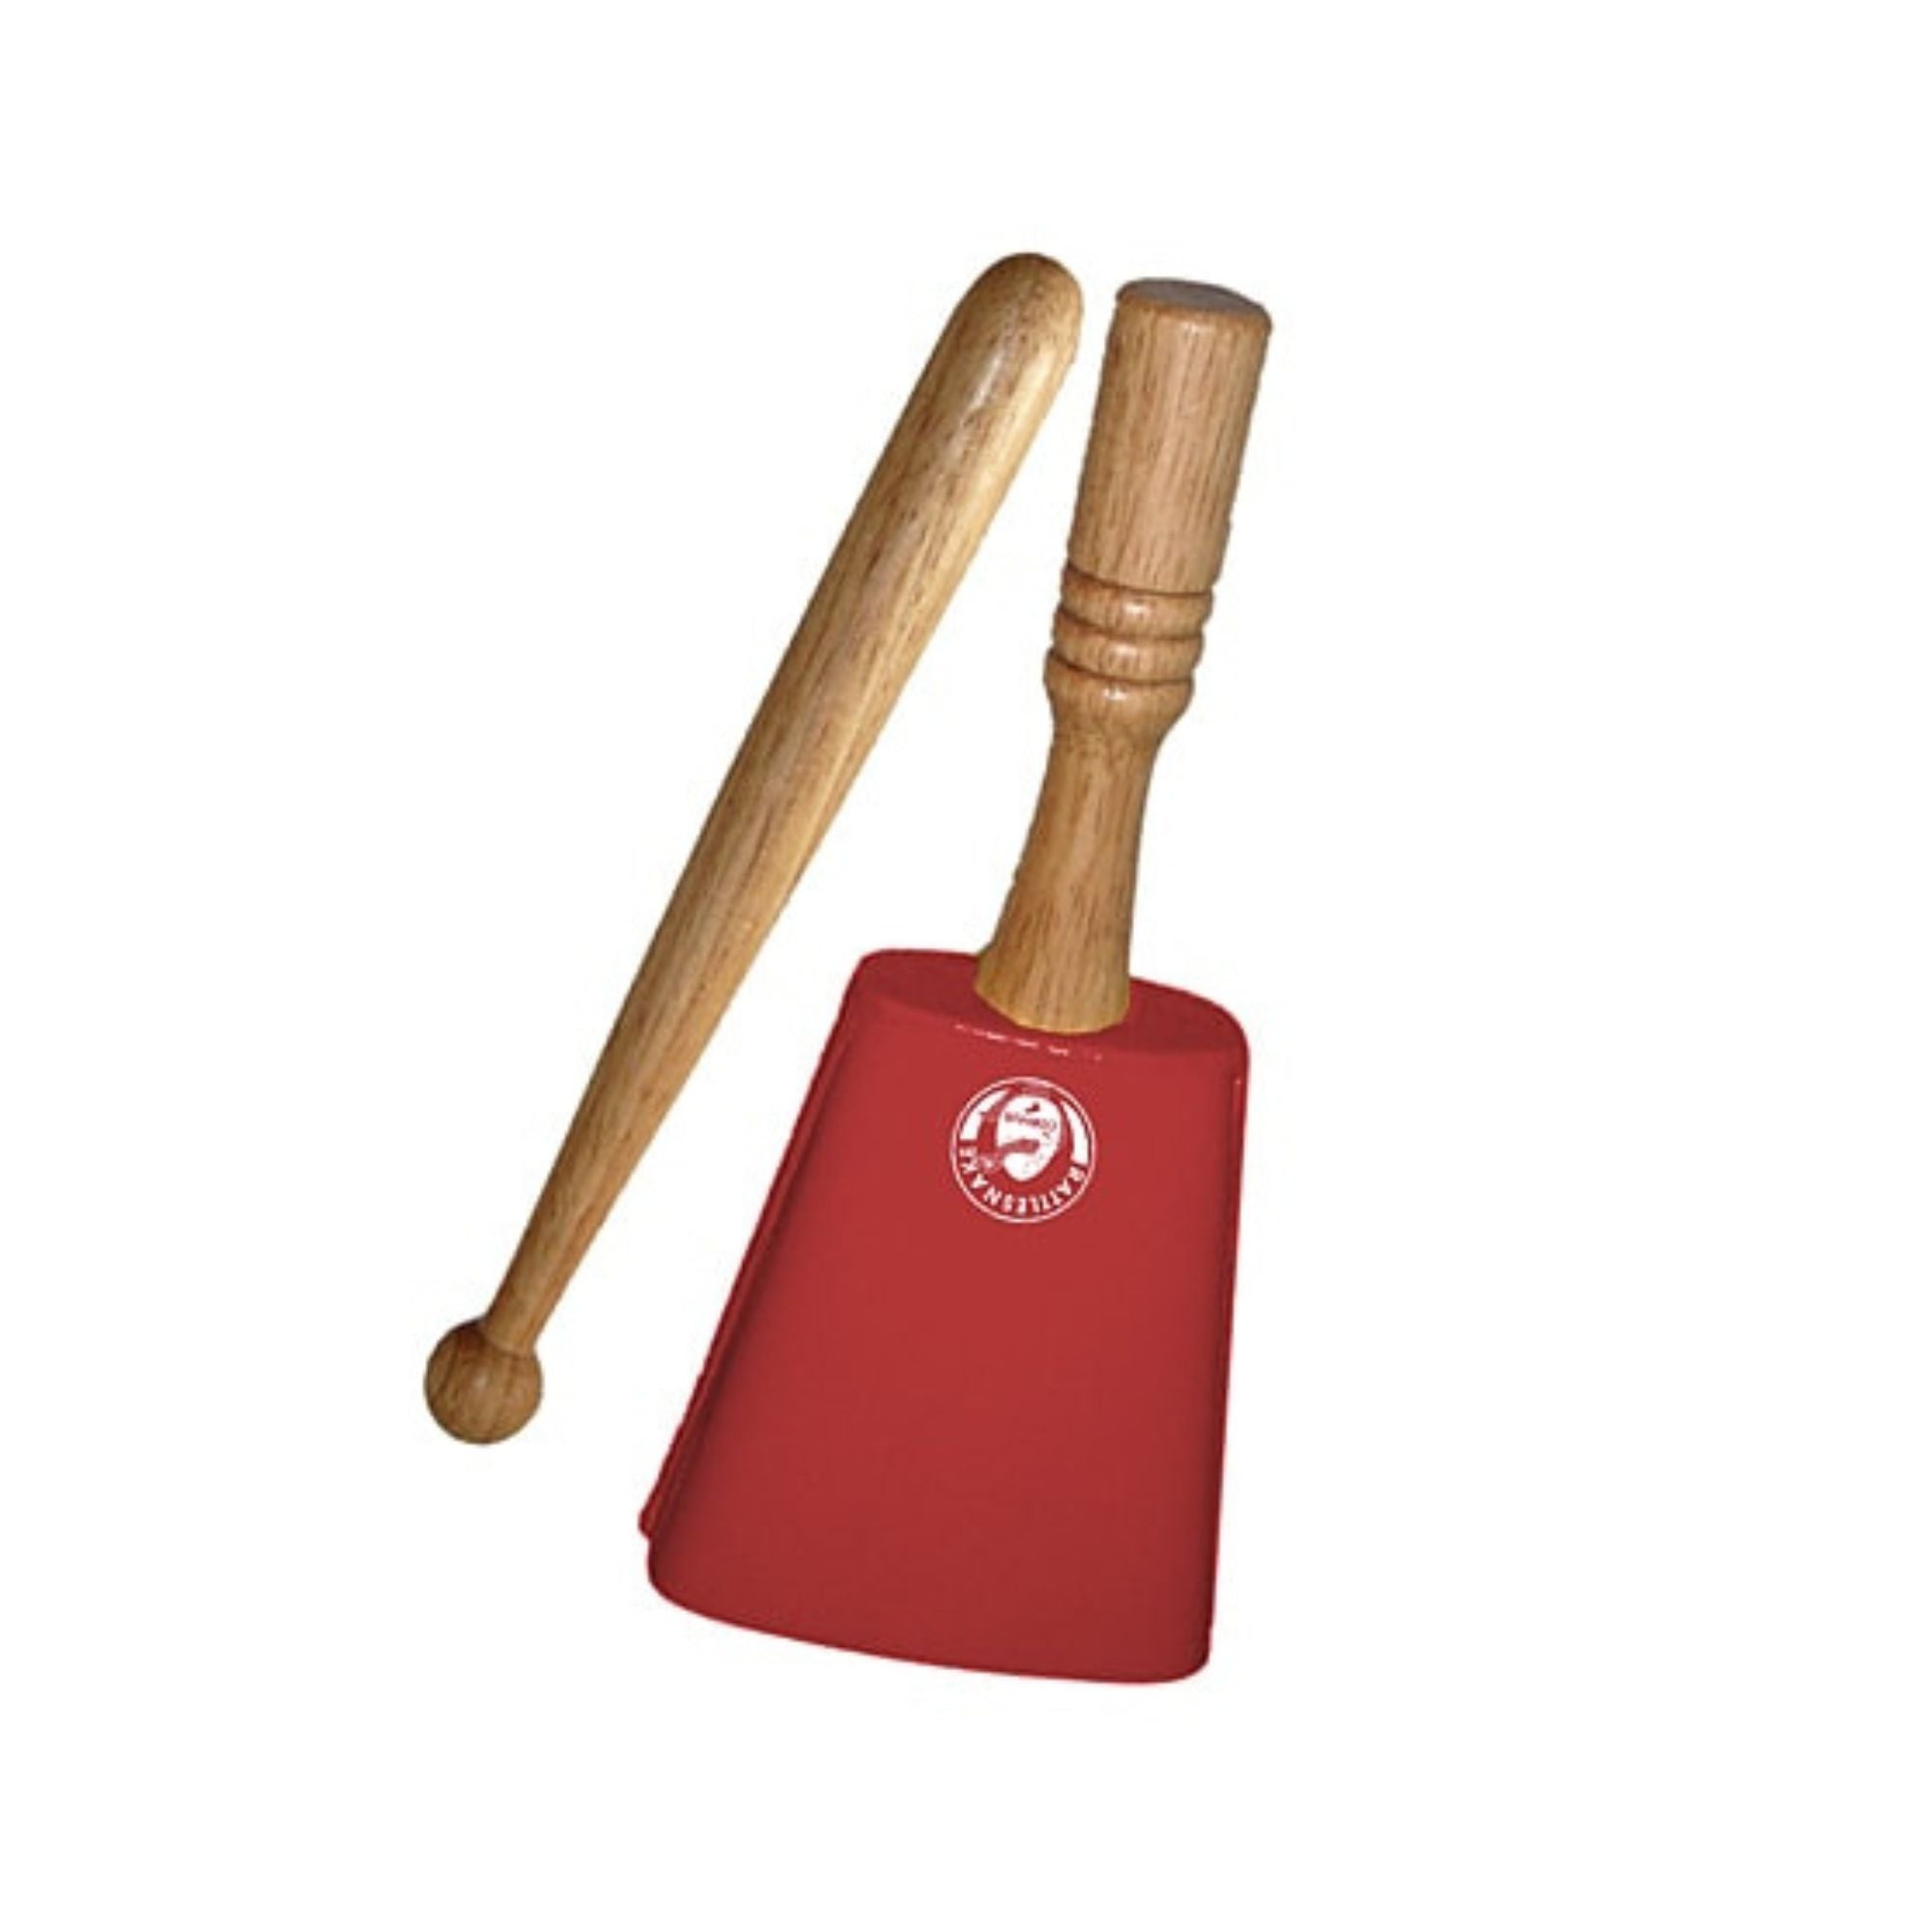 Red rattlesnake percussion cowbell with solid wood handle and beater